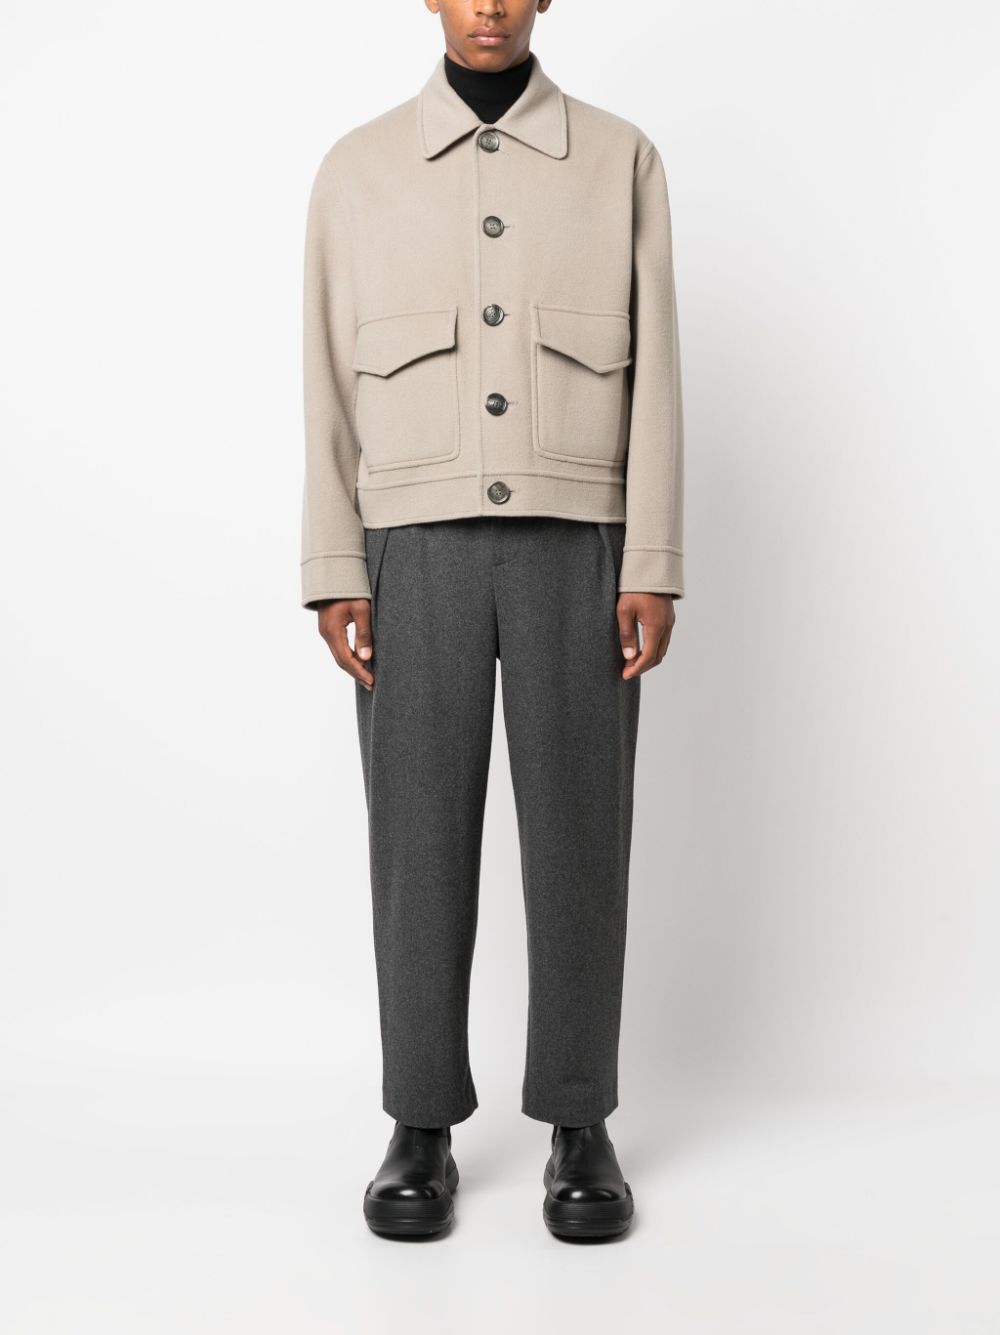 AMI Paris pointed-collar Buttoned Jacket - Farfetch